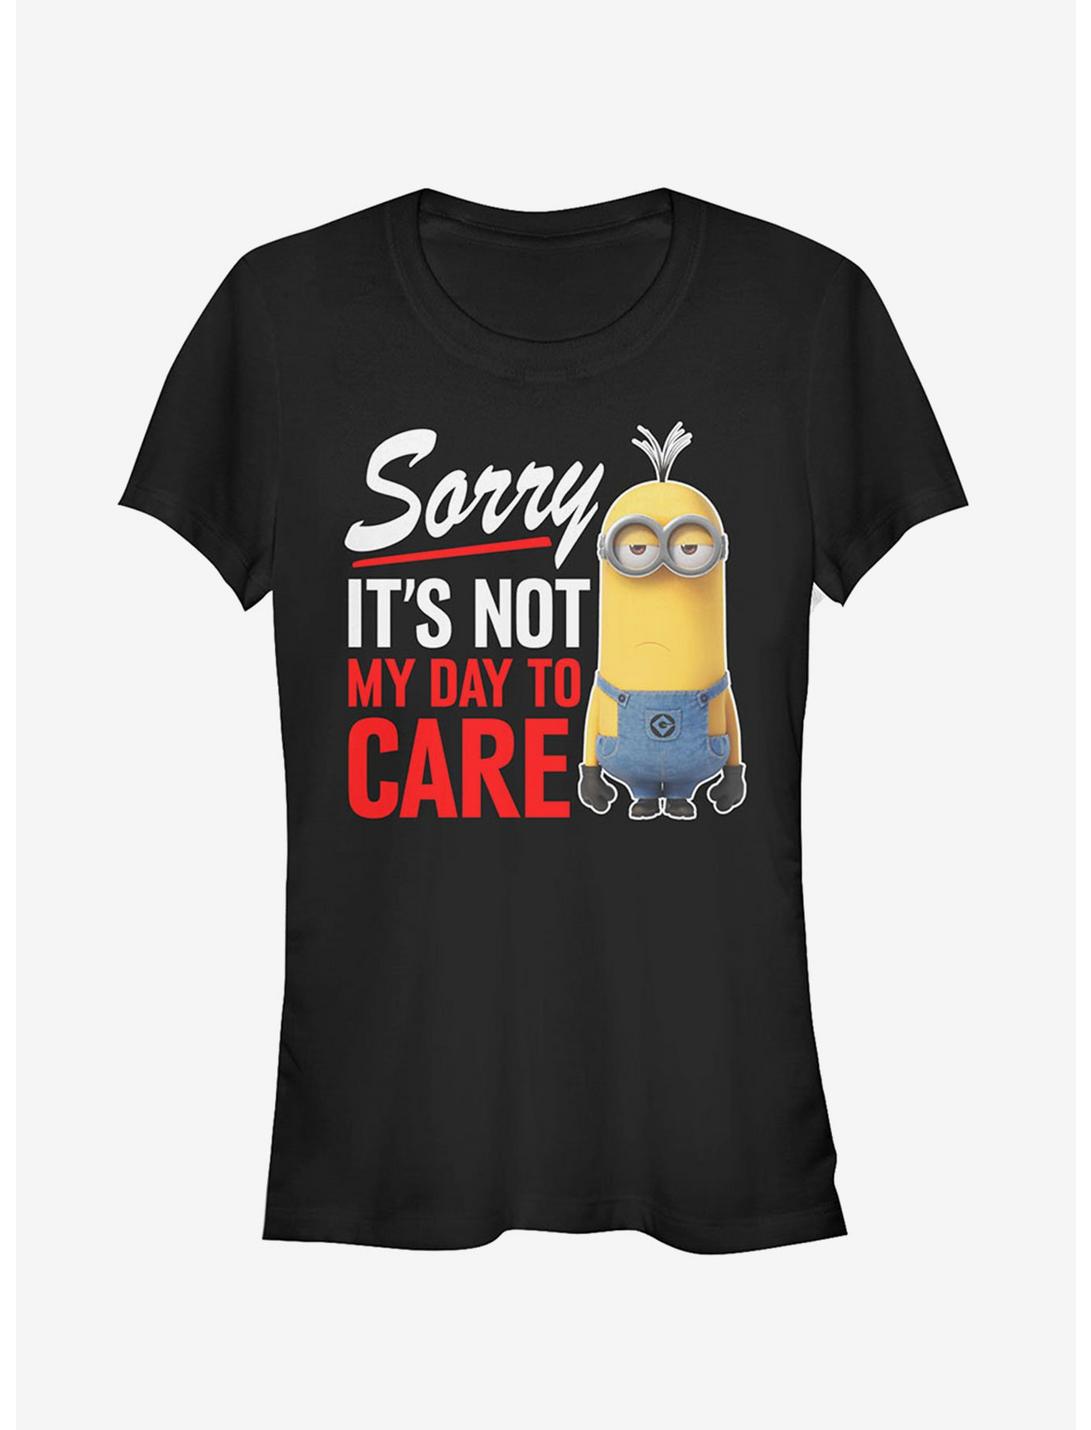 Minion Not Day to Care Girls T-Shirt, BLACK, hi-res